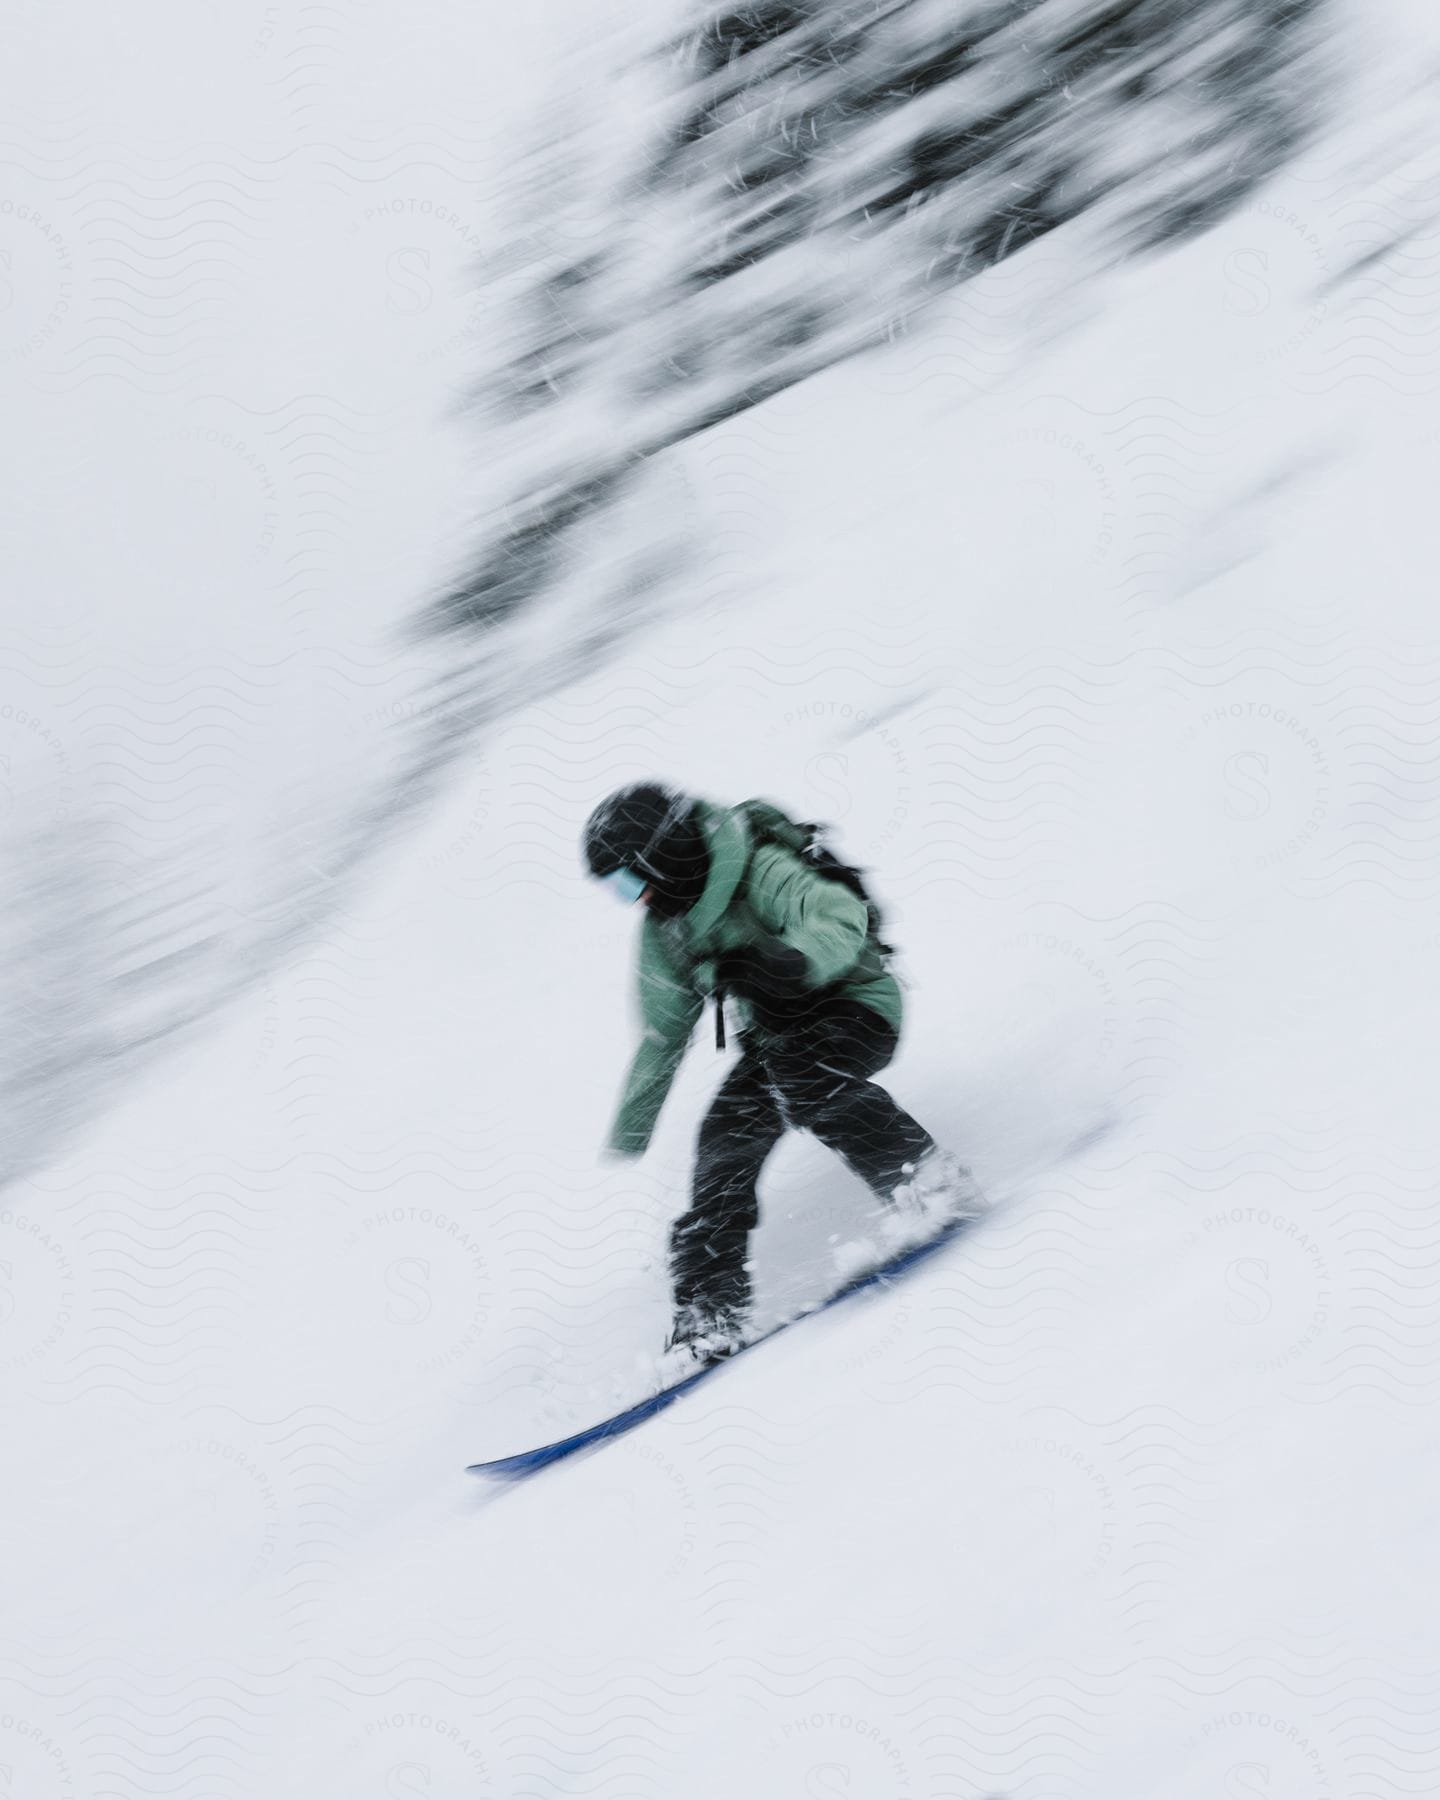 A man snowboards down a snowcovered mountainside